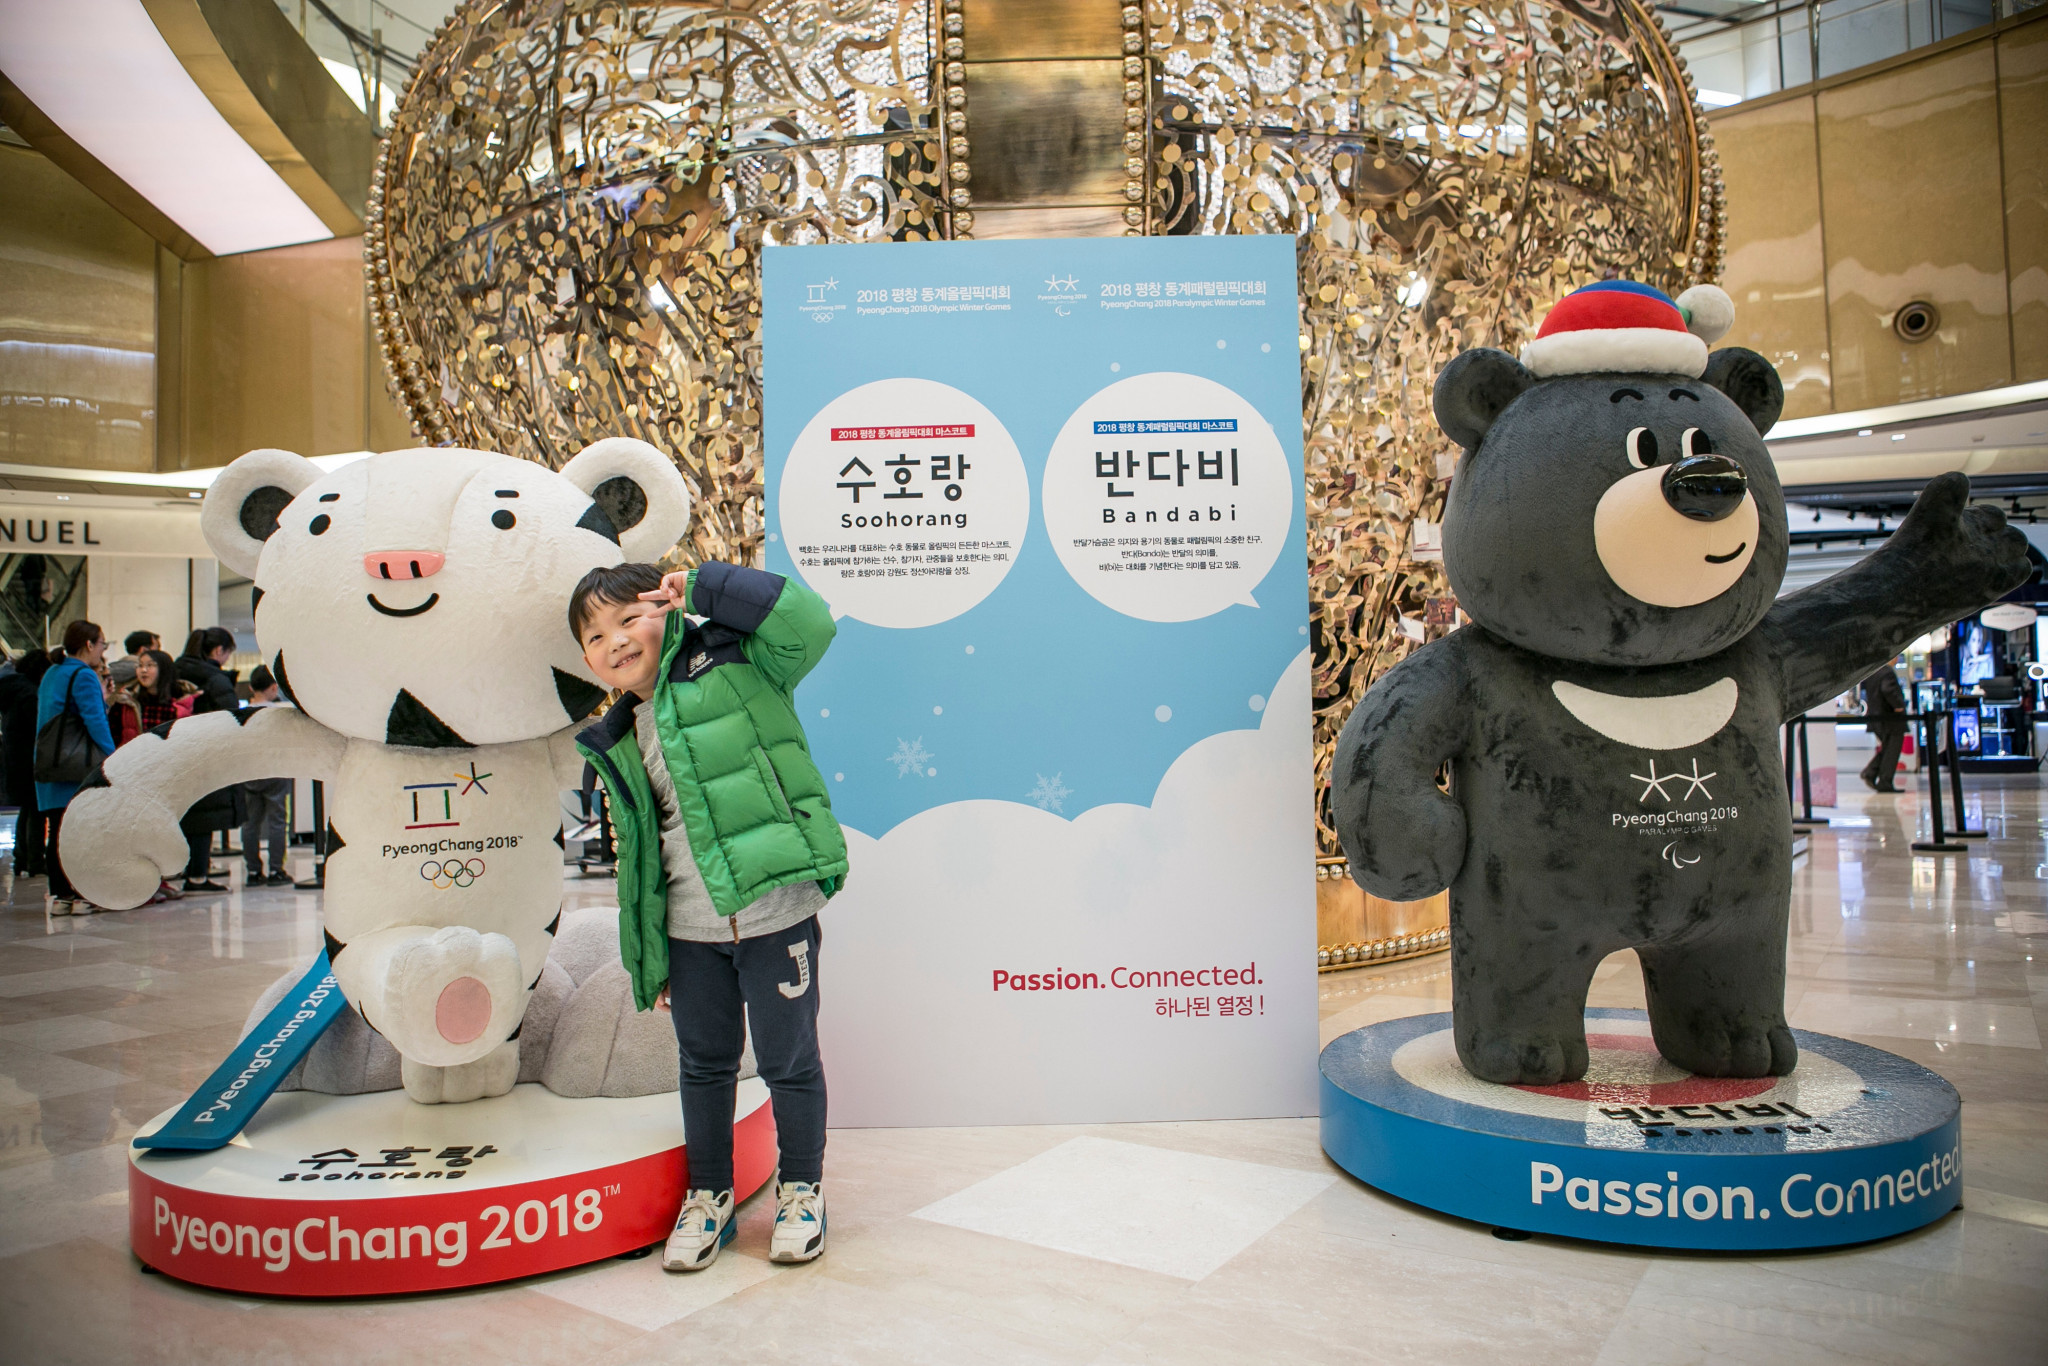 Moongcho was inspired by the Pyeongchang 2018 Olympic and Paralympic mascots Soohorang and Bandabi ©Getty Images